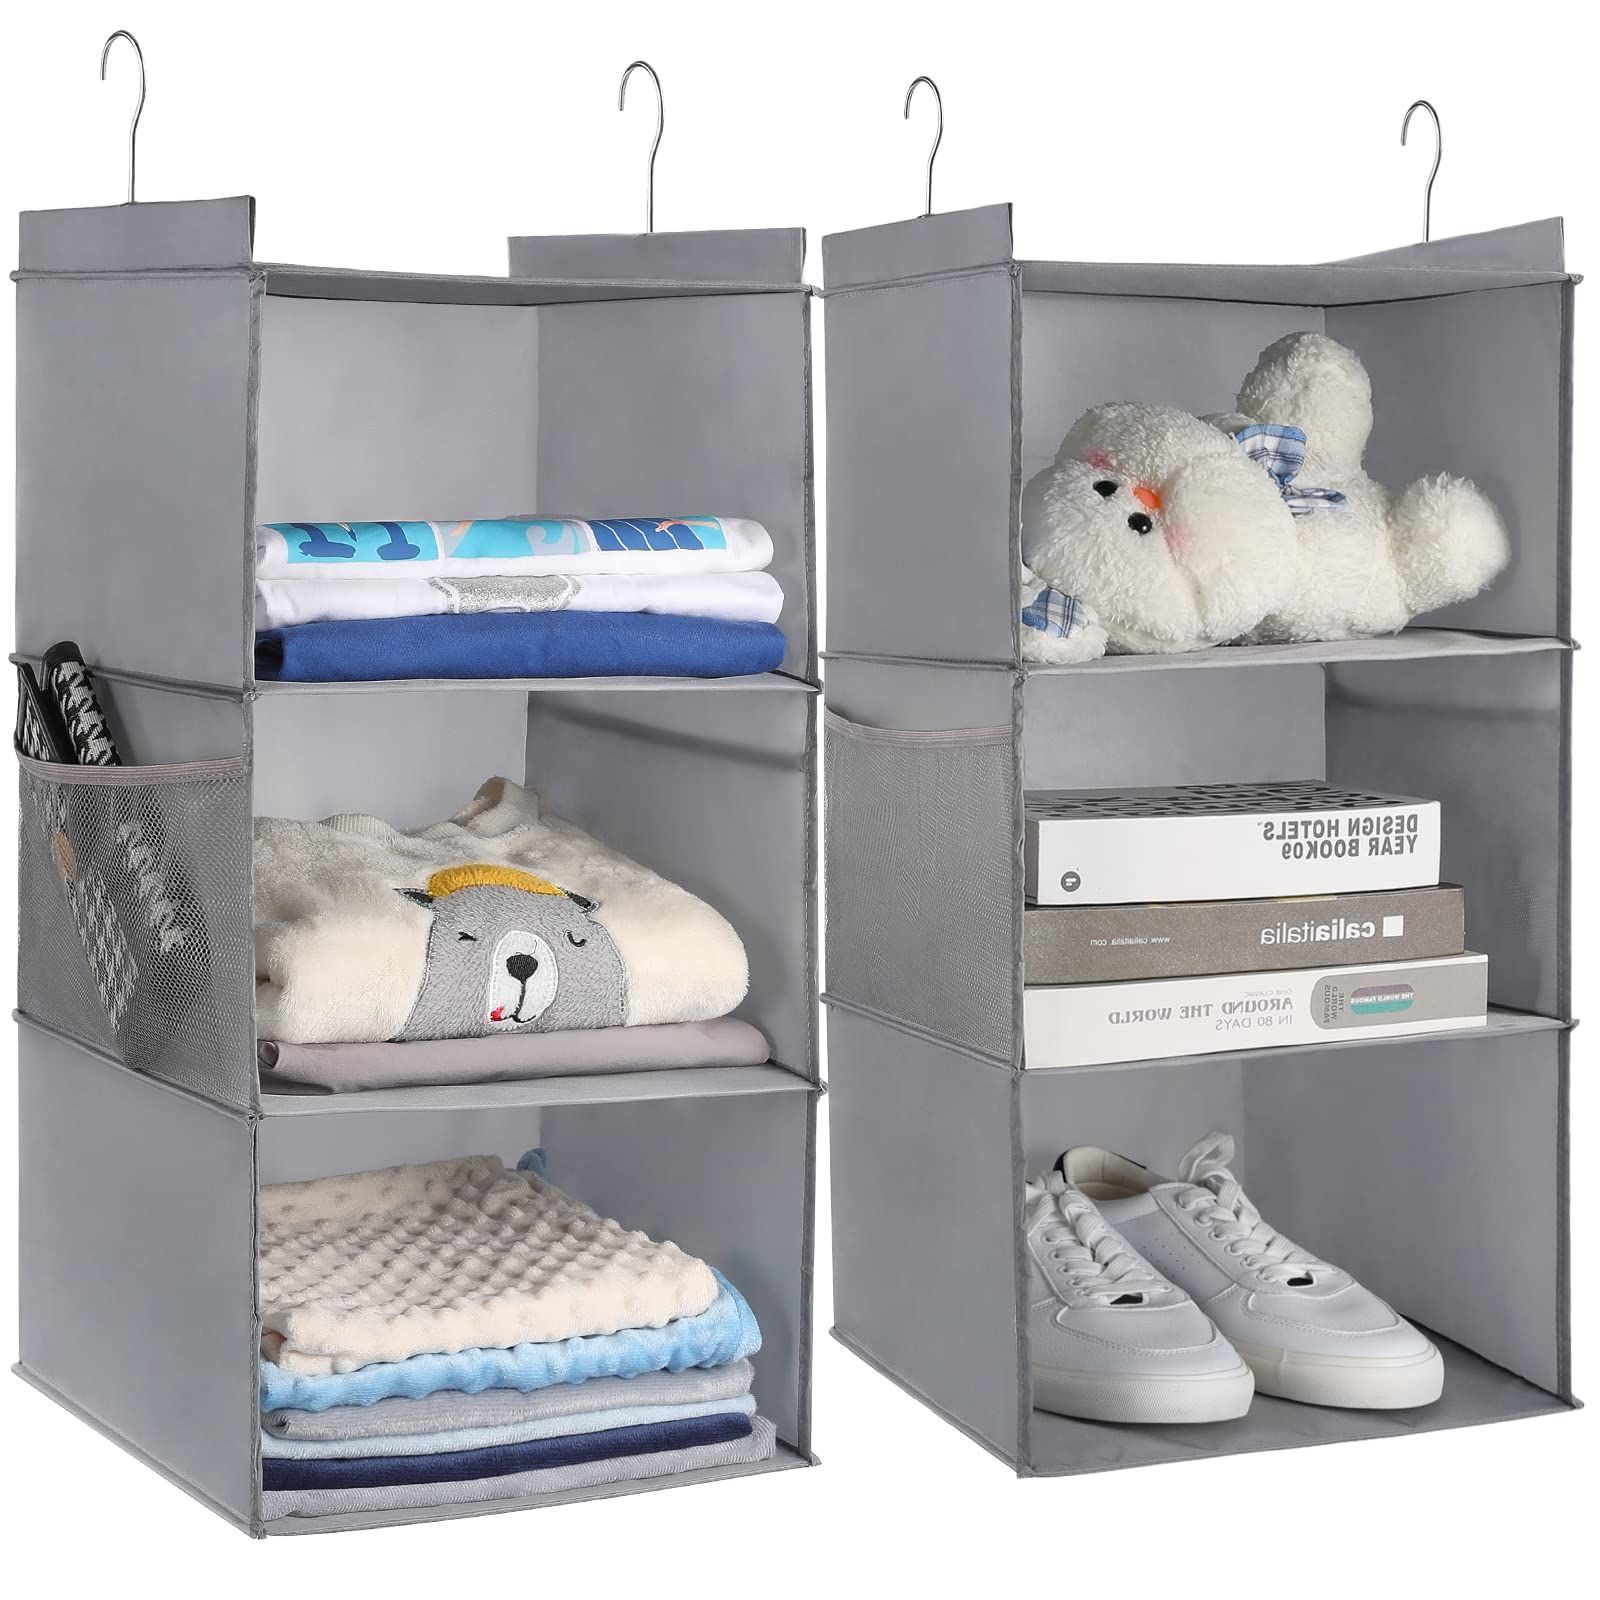 Amazon: Layerspace 2 Pack Hanging Closet Organizer 3 Shelf, Large Size Hanging  Shelves For Closet With Side Pocket, Linen, 12.2" D X 12.2" W X  (View 9 of 10)